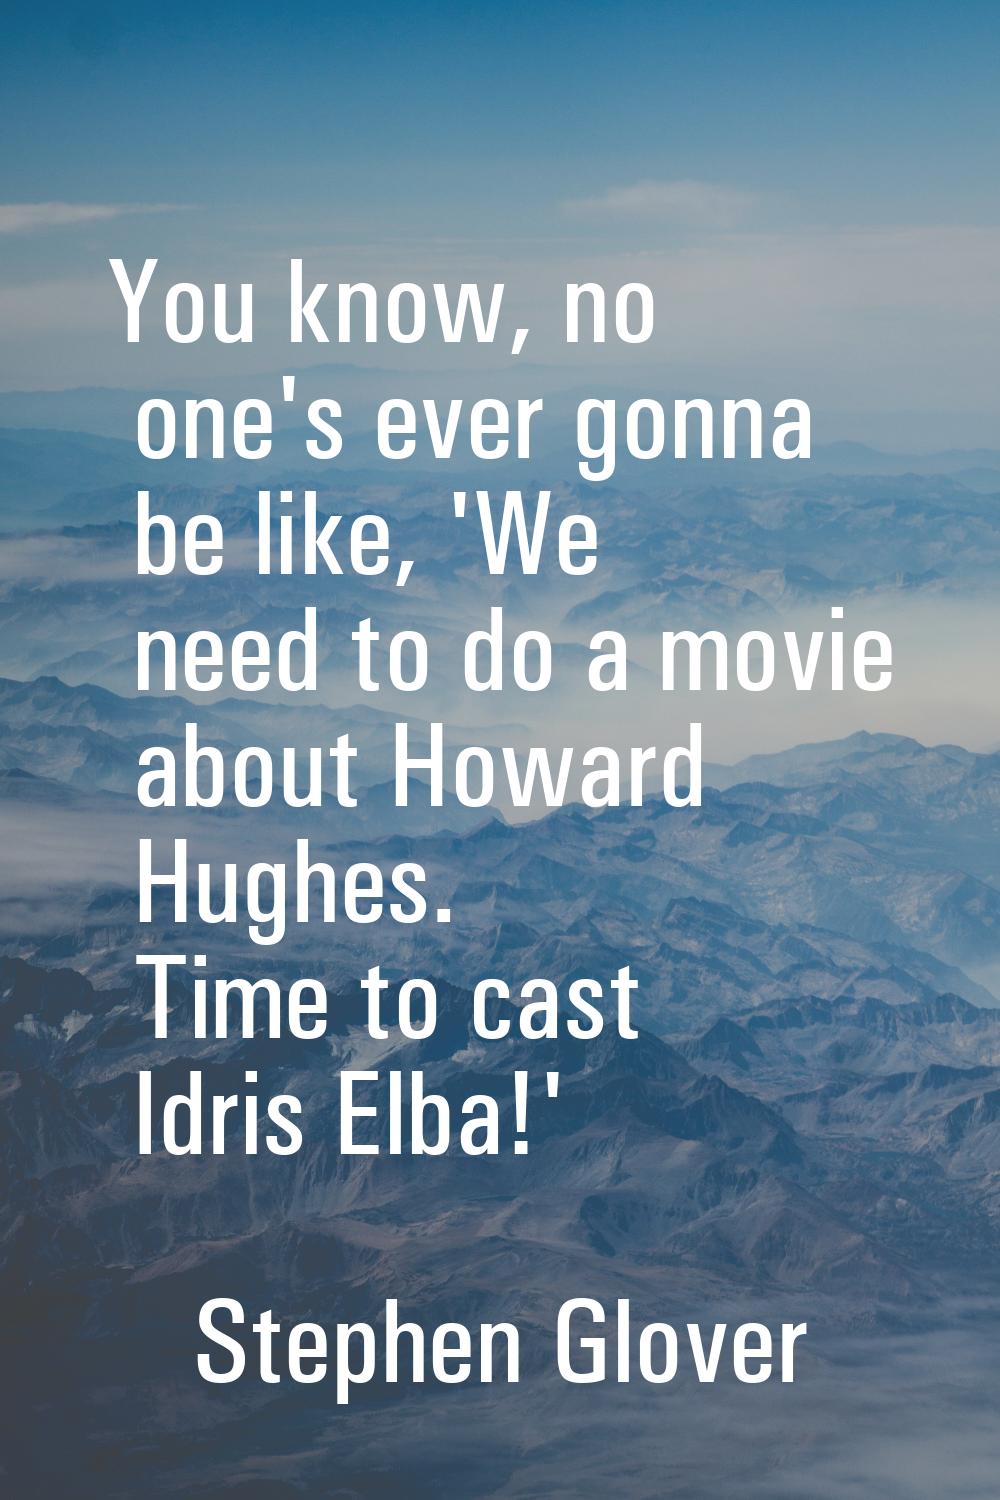 You know, no one's ever gonna be like, 'We need to do a movie about Howard Hughes. Time to cast Idr